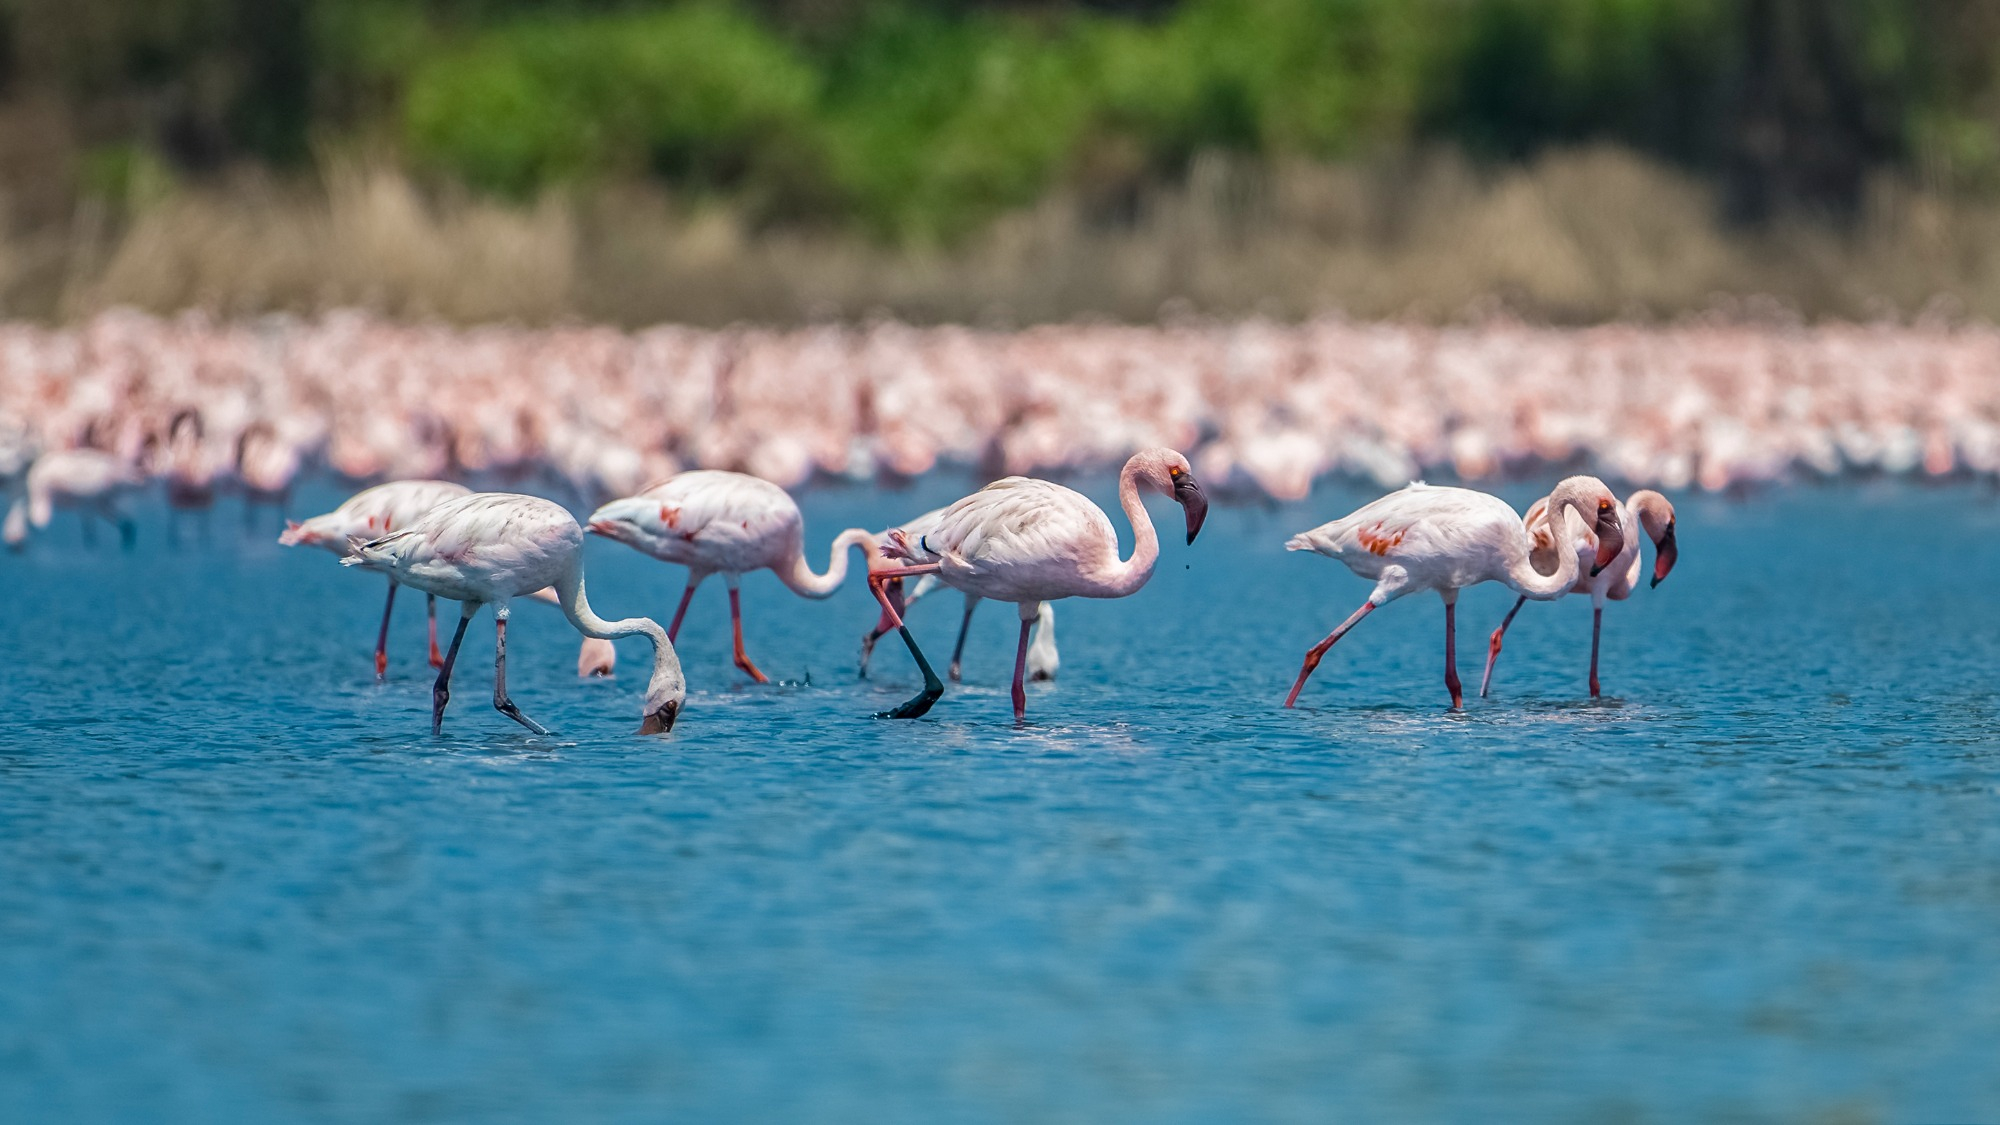 For several decades, flocks of lesser and greater flamingos have returned to a sliver of wetlands on the shoreline of Mumbai, India, increasing the population 13-fold. Their arrival has been a source of pride for local people, but development pressures are threatening the habitat of these feathered residents.